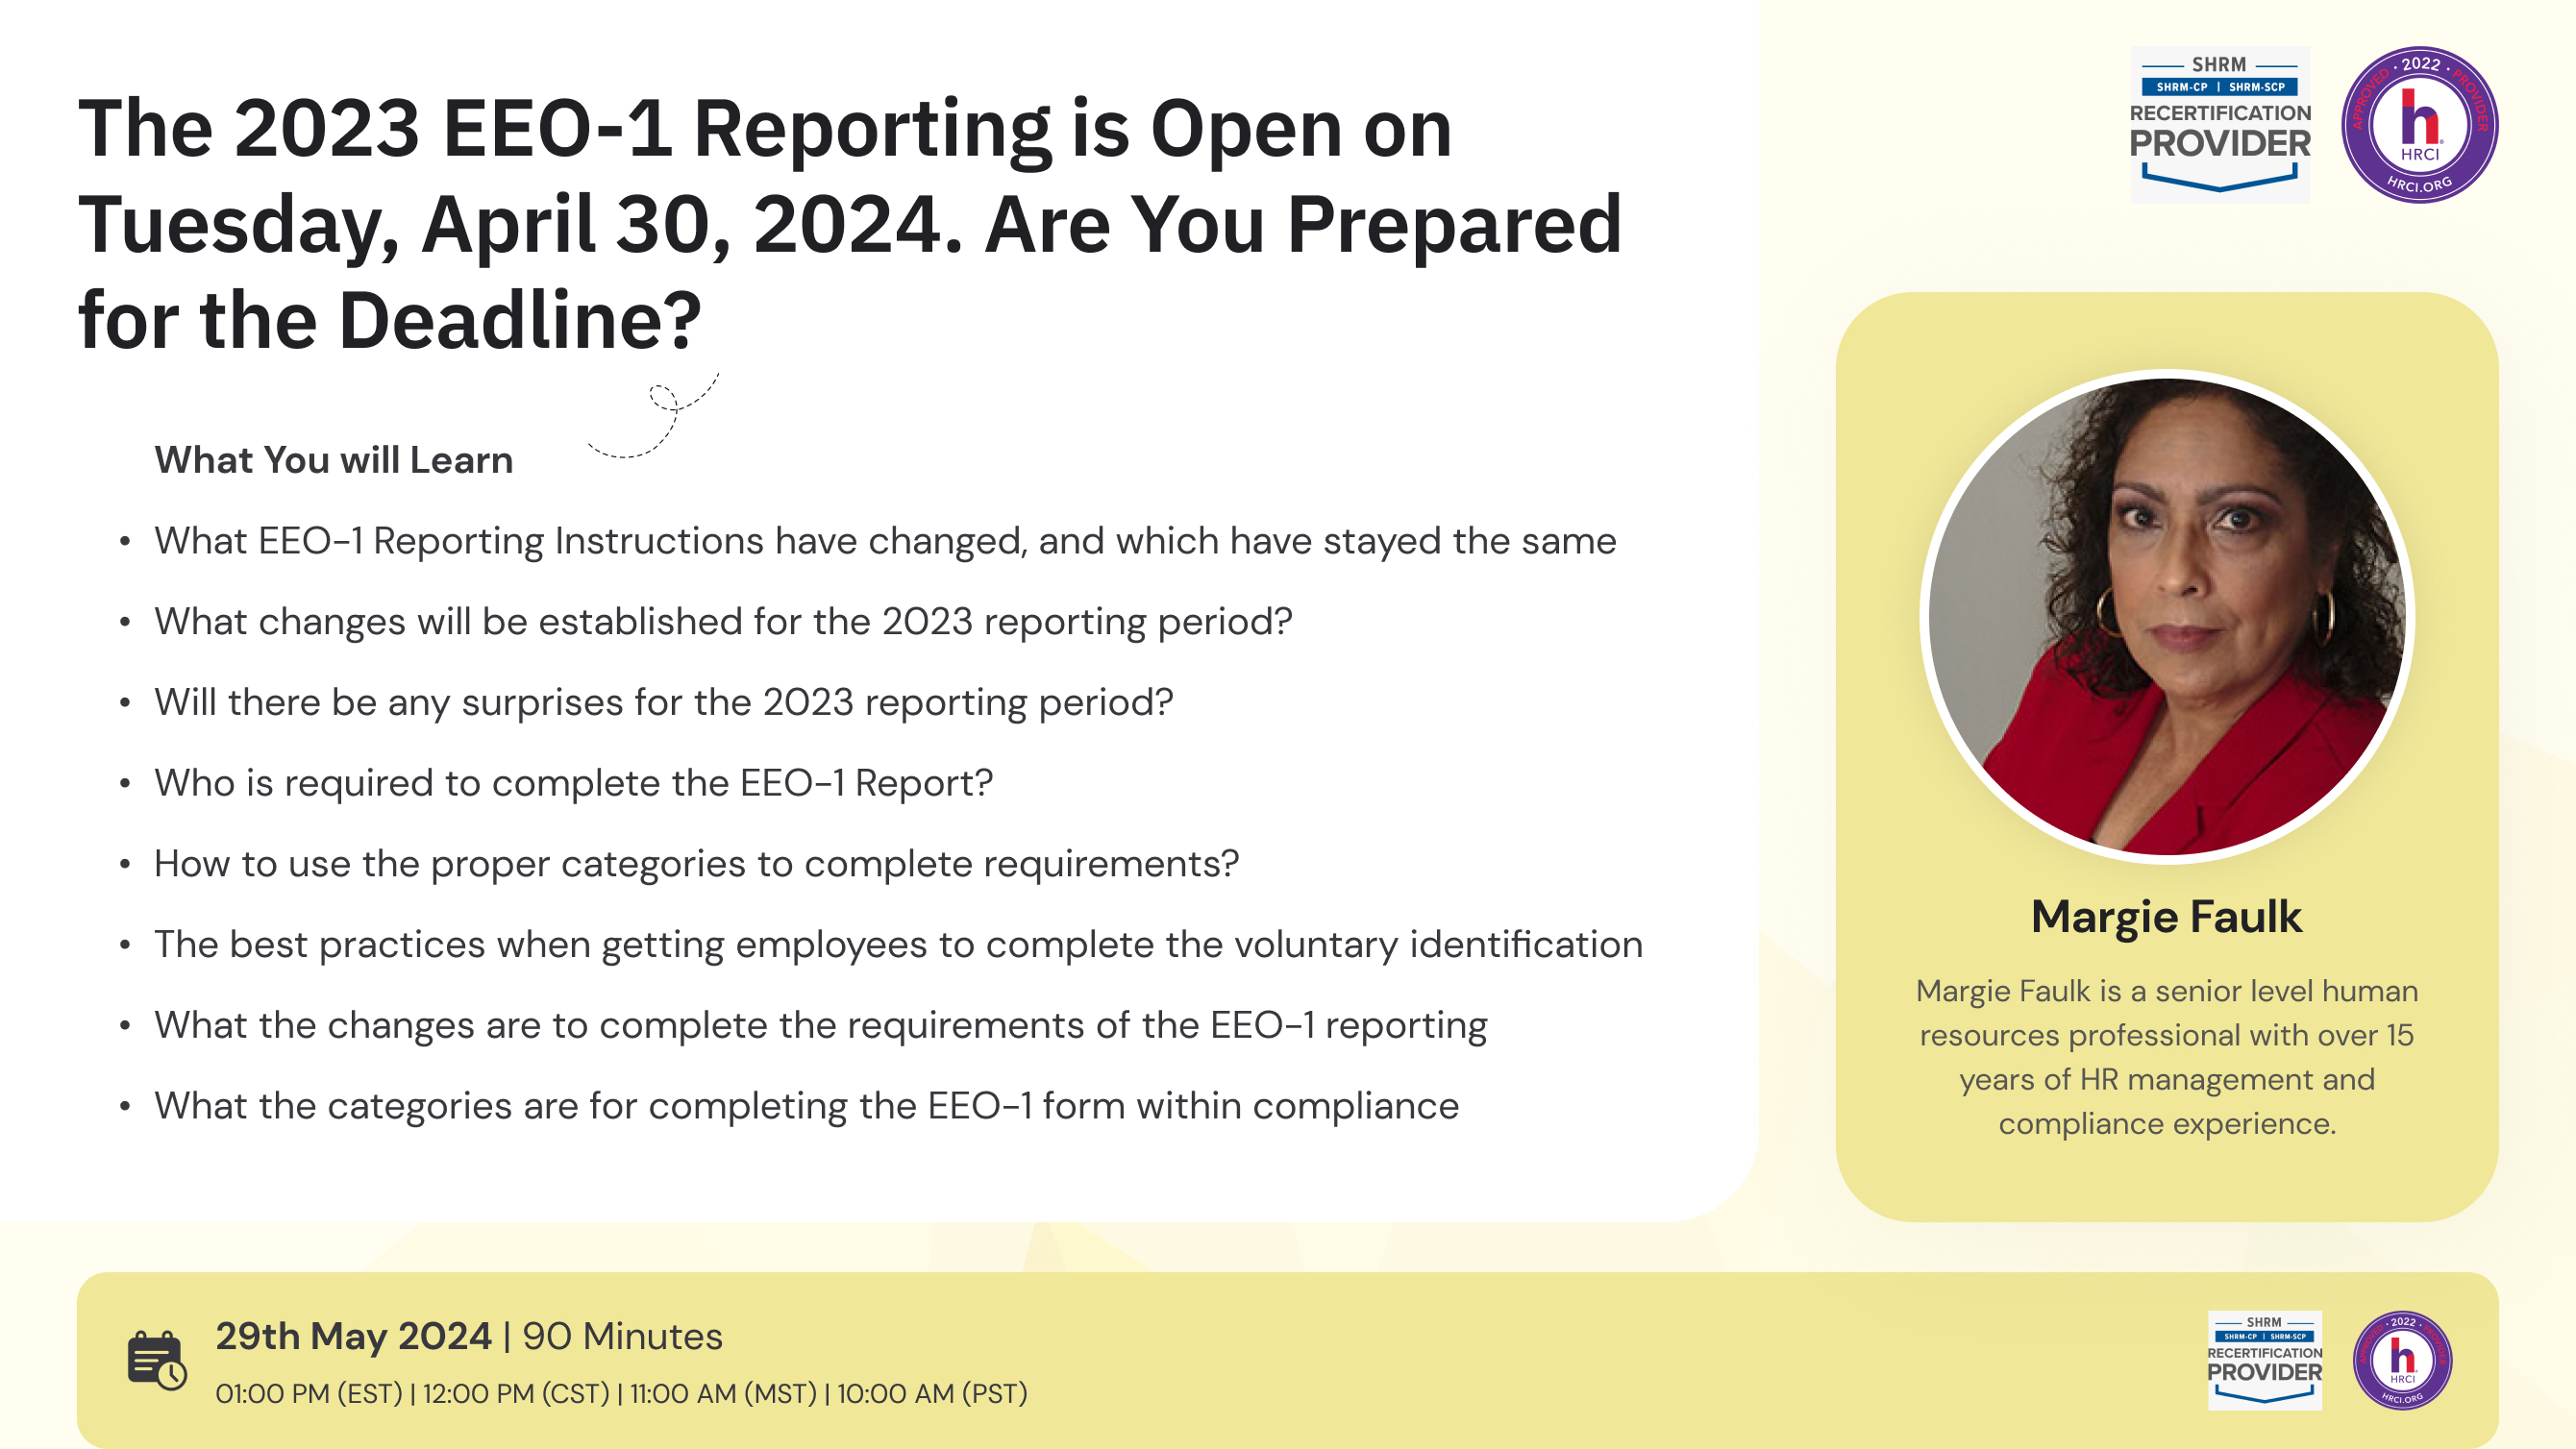 The 2023 EEO-1 Reporting is Open on Tuesday, April 30, 2024. Are You Prepared for the Deadline?